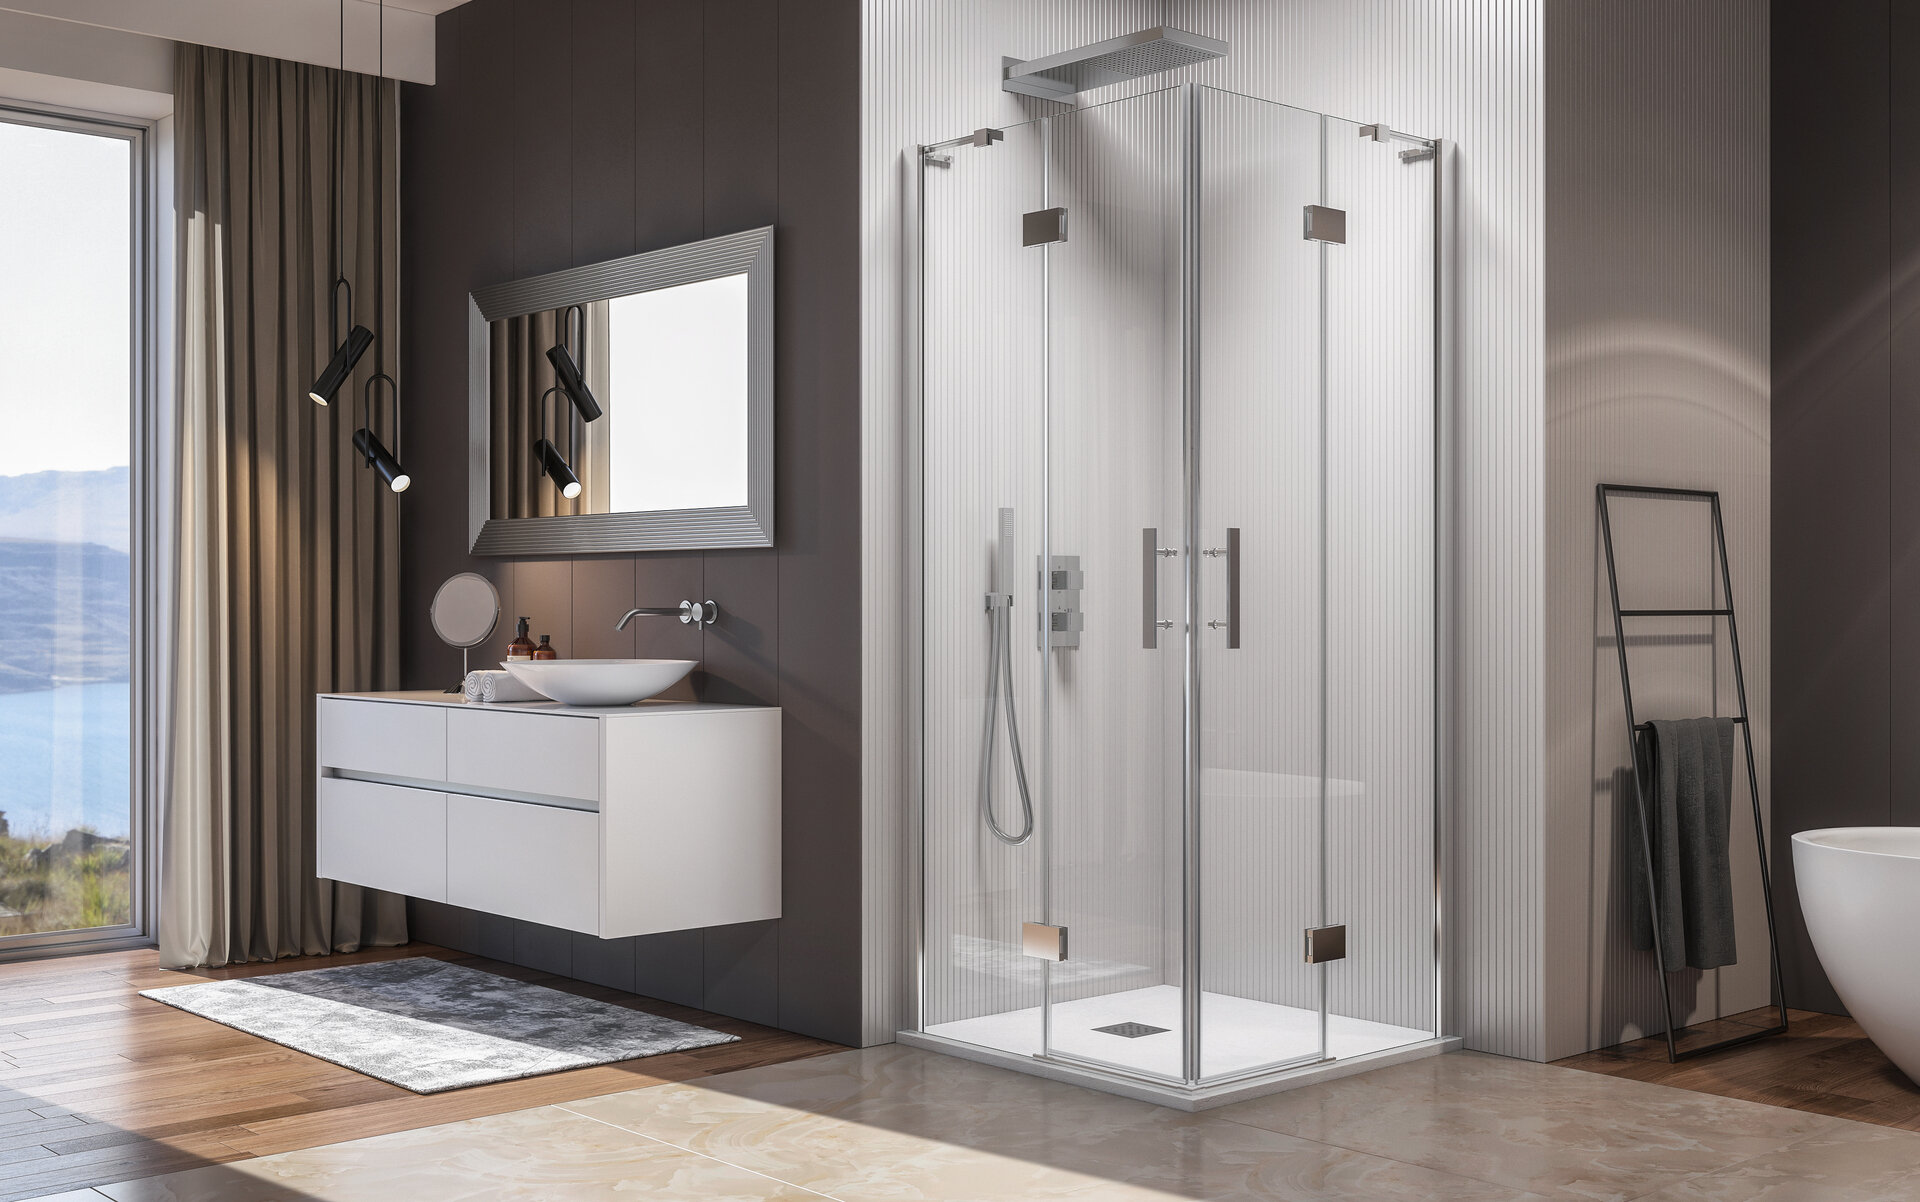 Bathroom with a bidet - how to design it? - SanSwiss